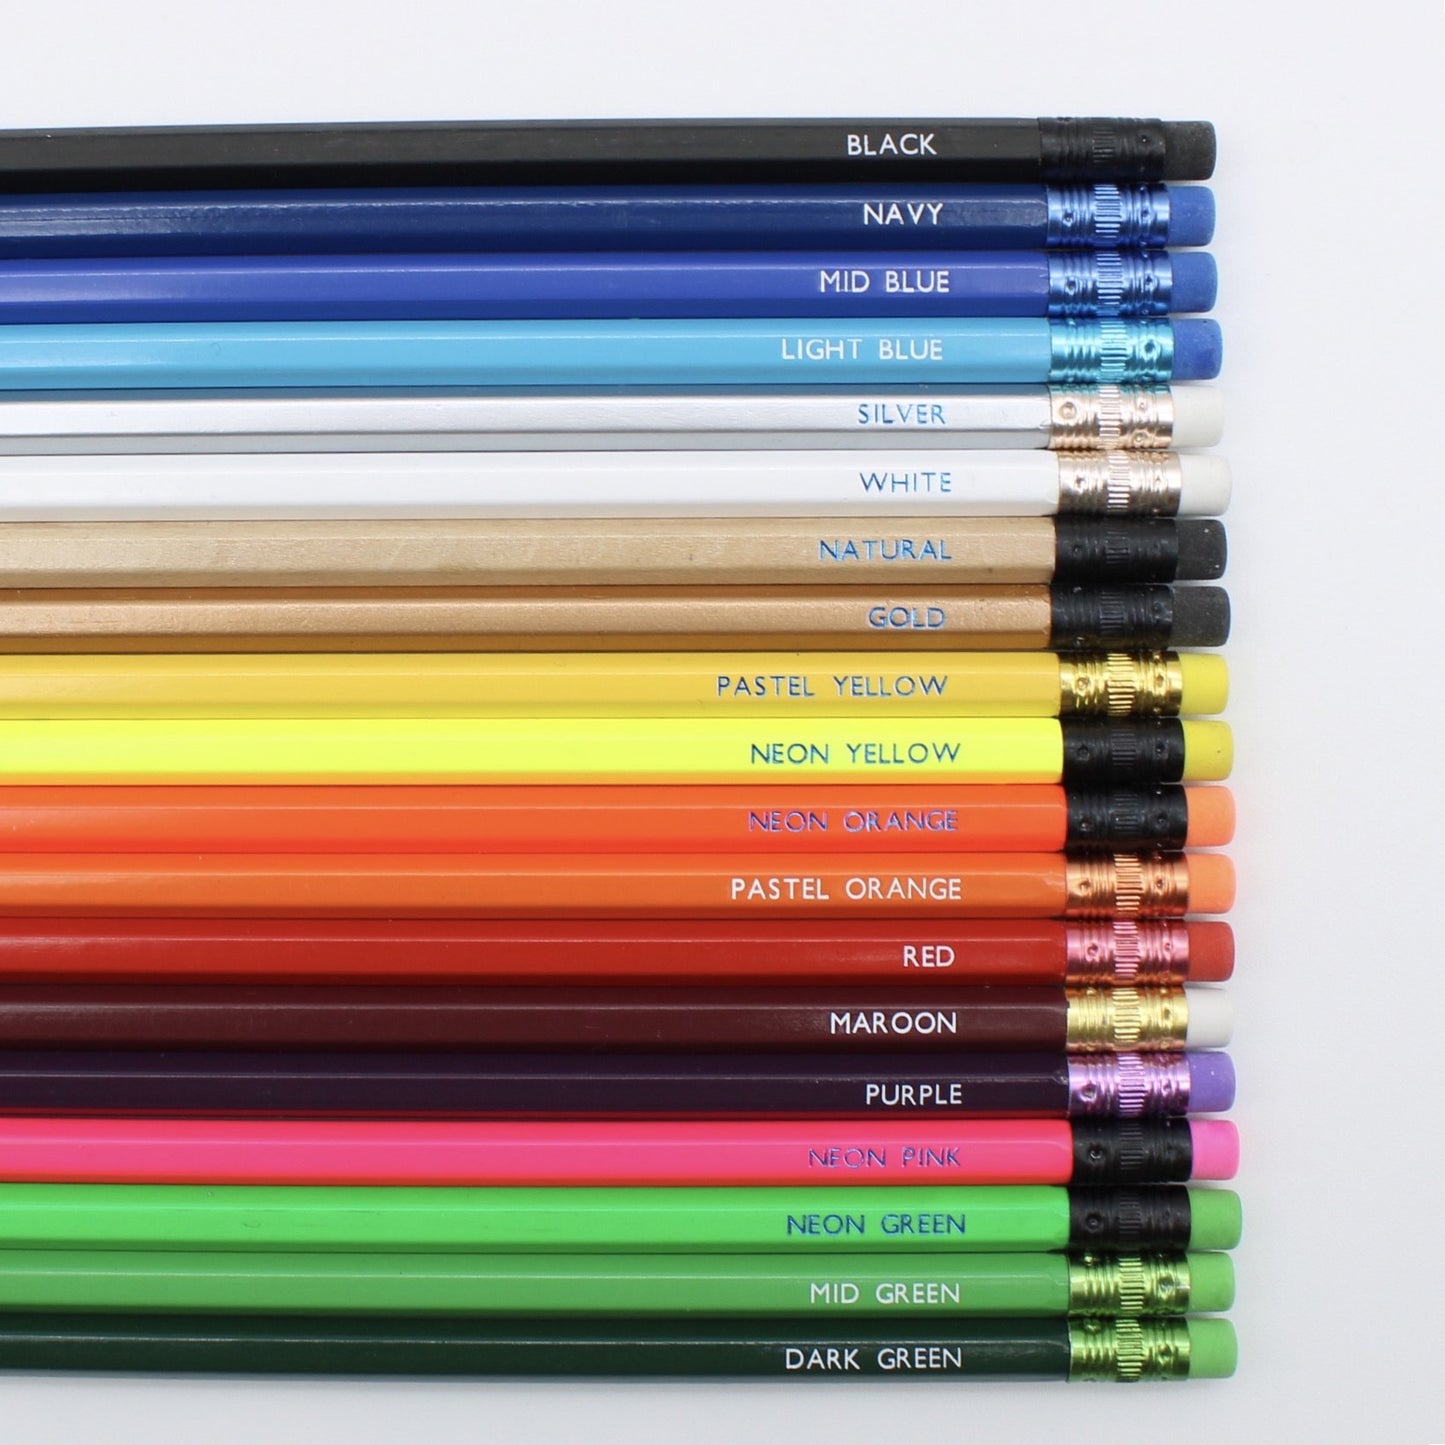 Personalised boxed set of 4 pencils - Mixed Phrases